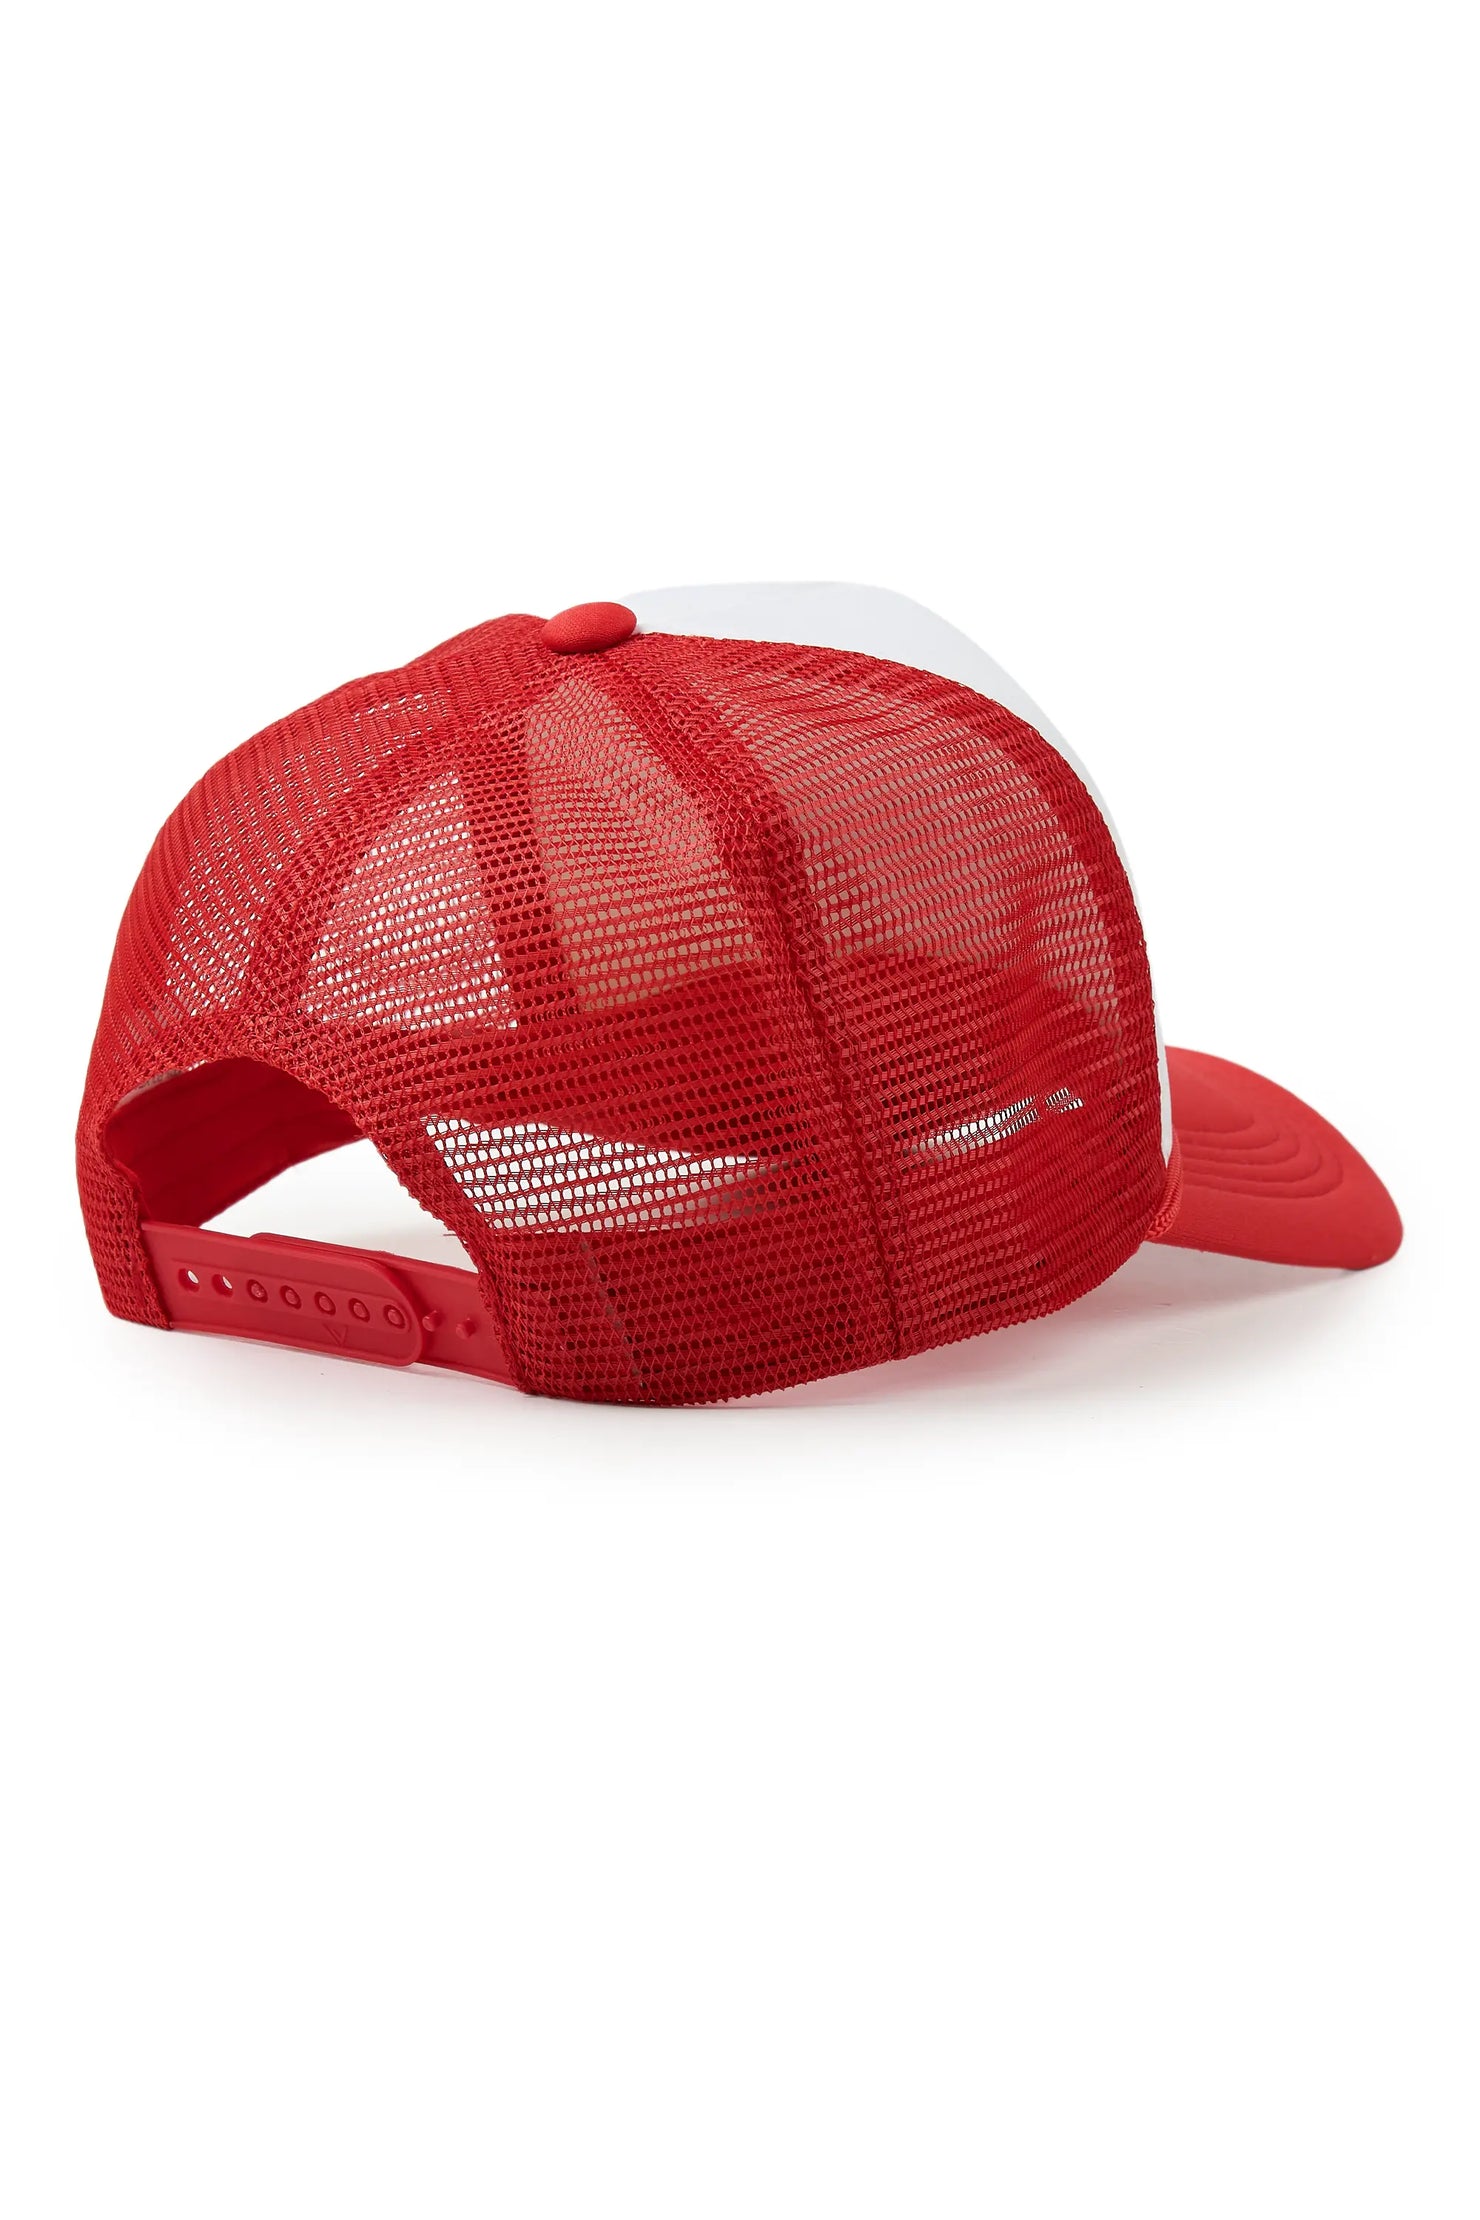 Mikelo White/Red Trucker Hat